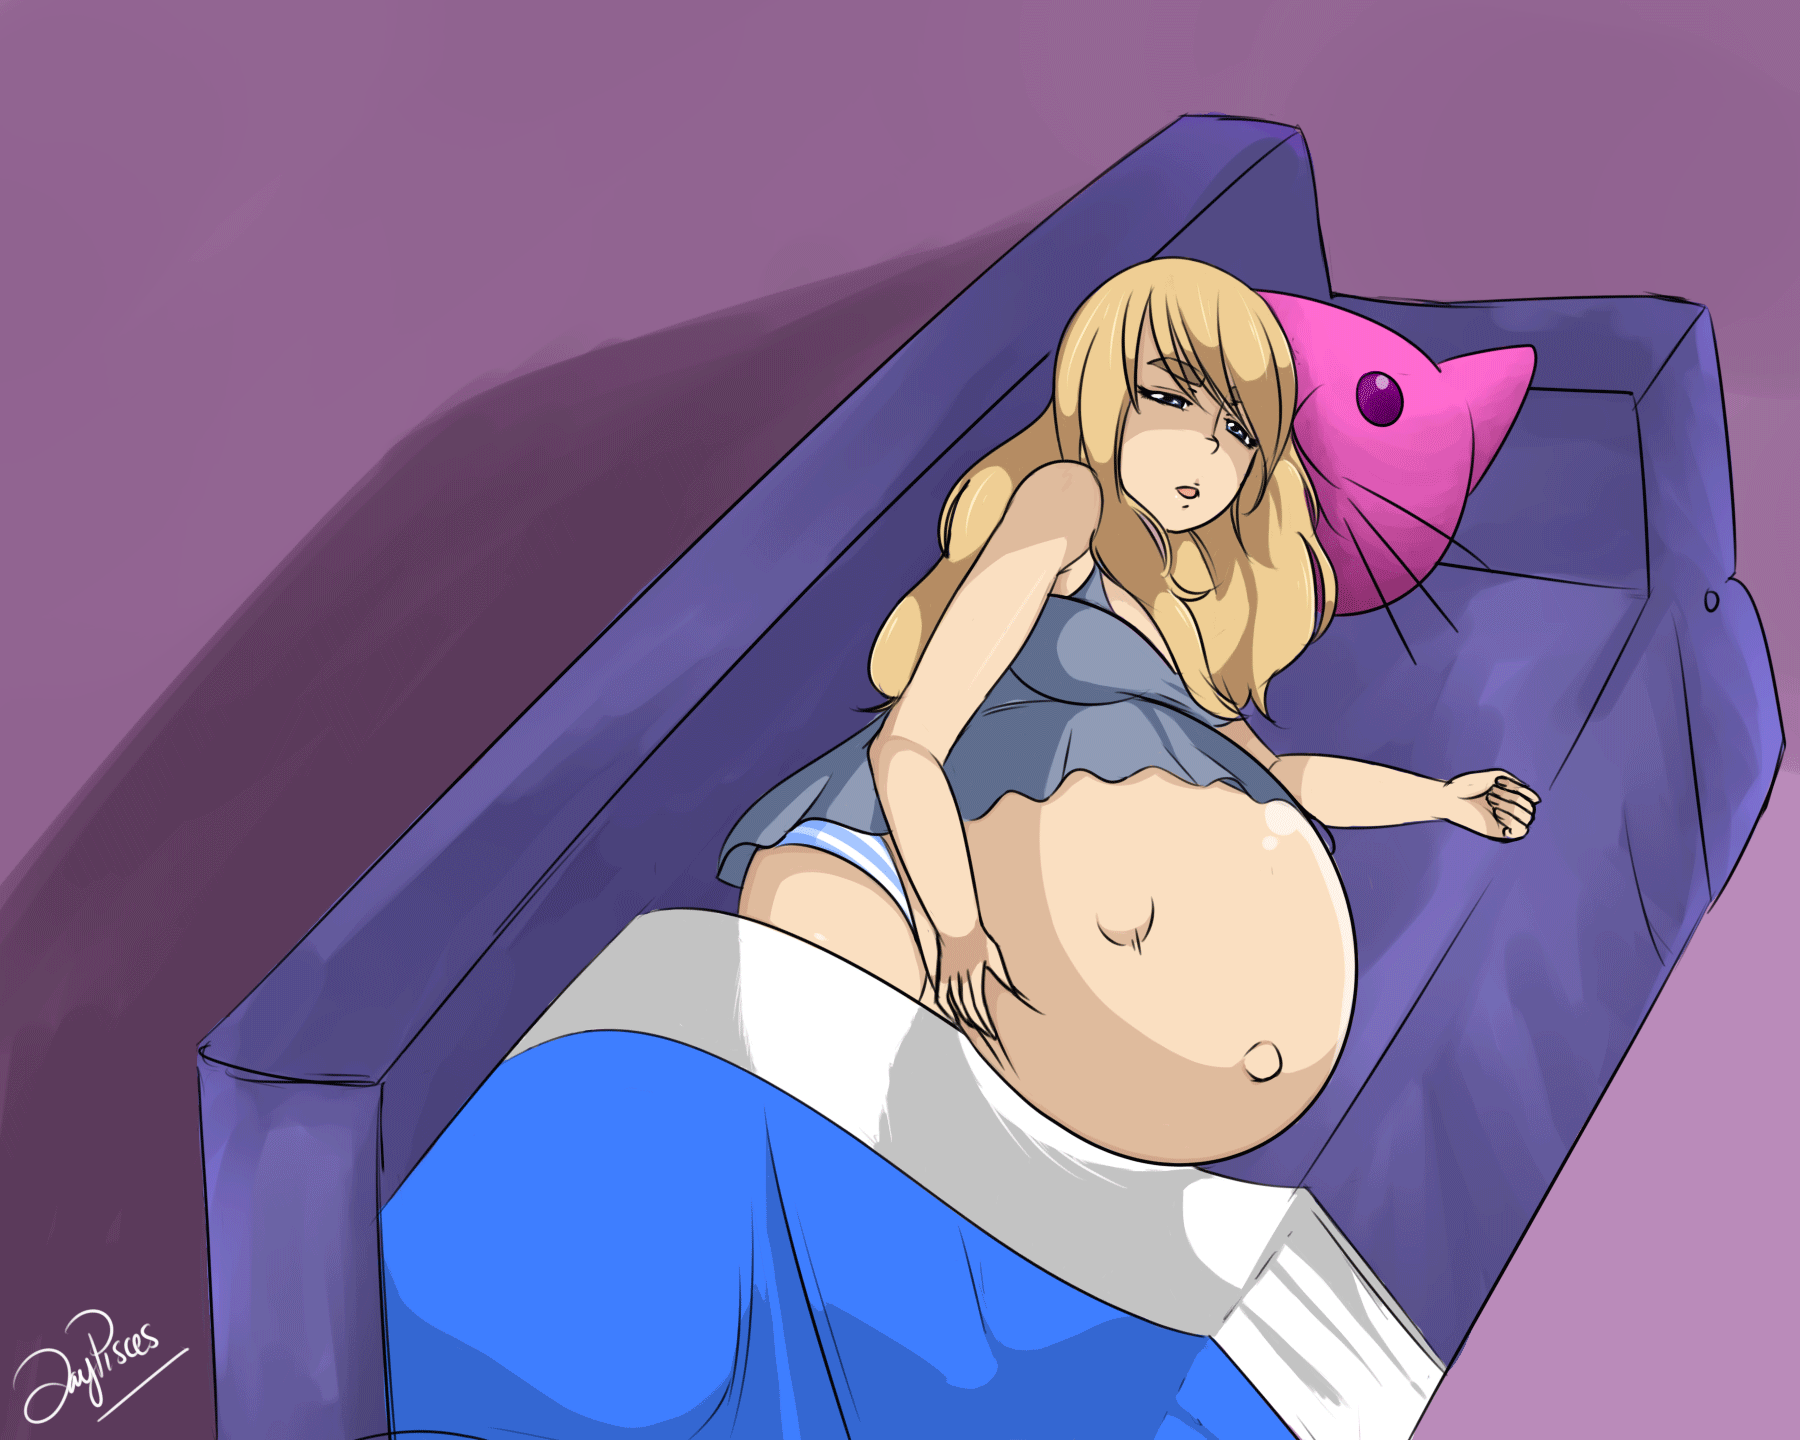 Pregnant belly stuffing